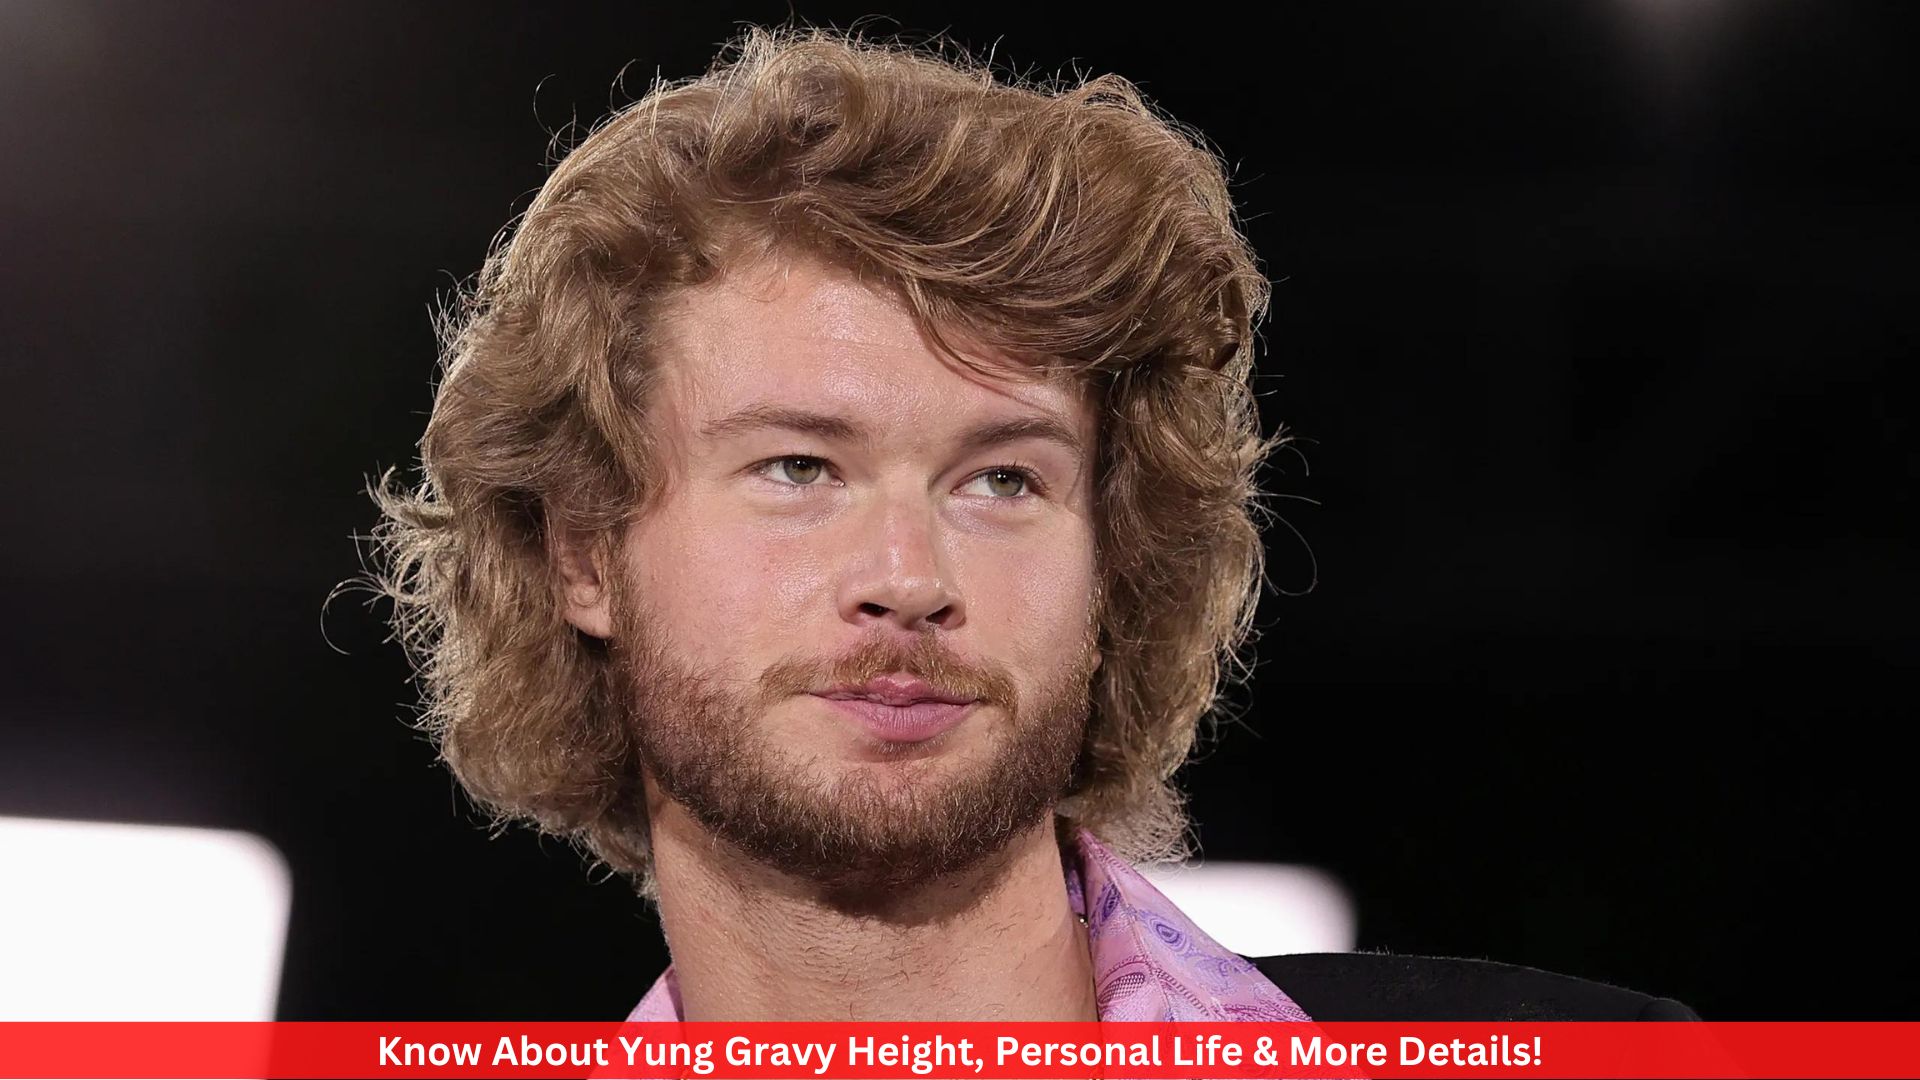 Know About Yung Gravy Height, Personal Life & More Details!